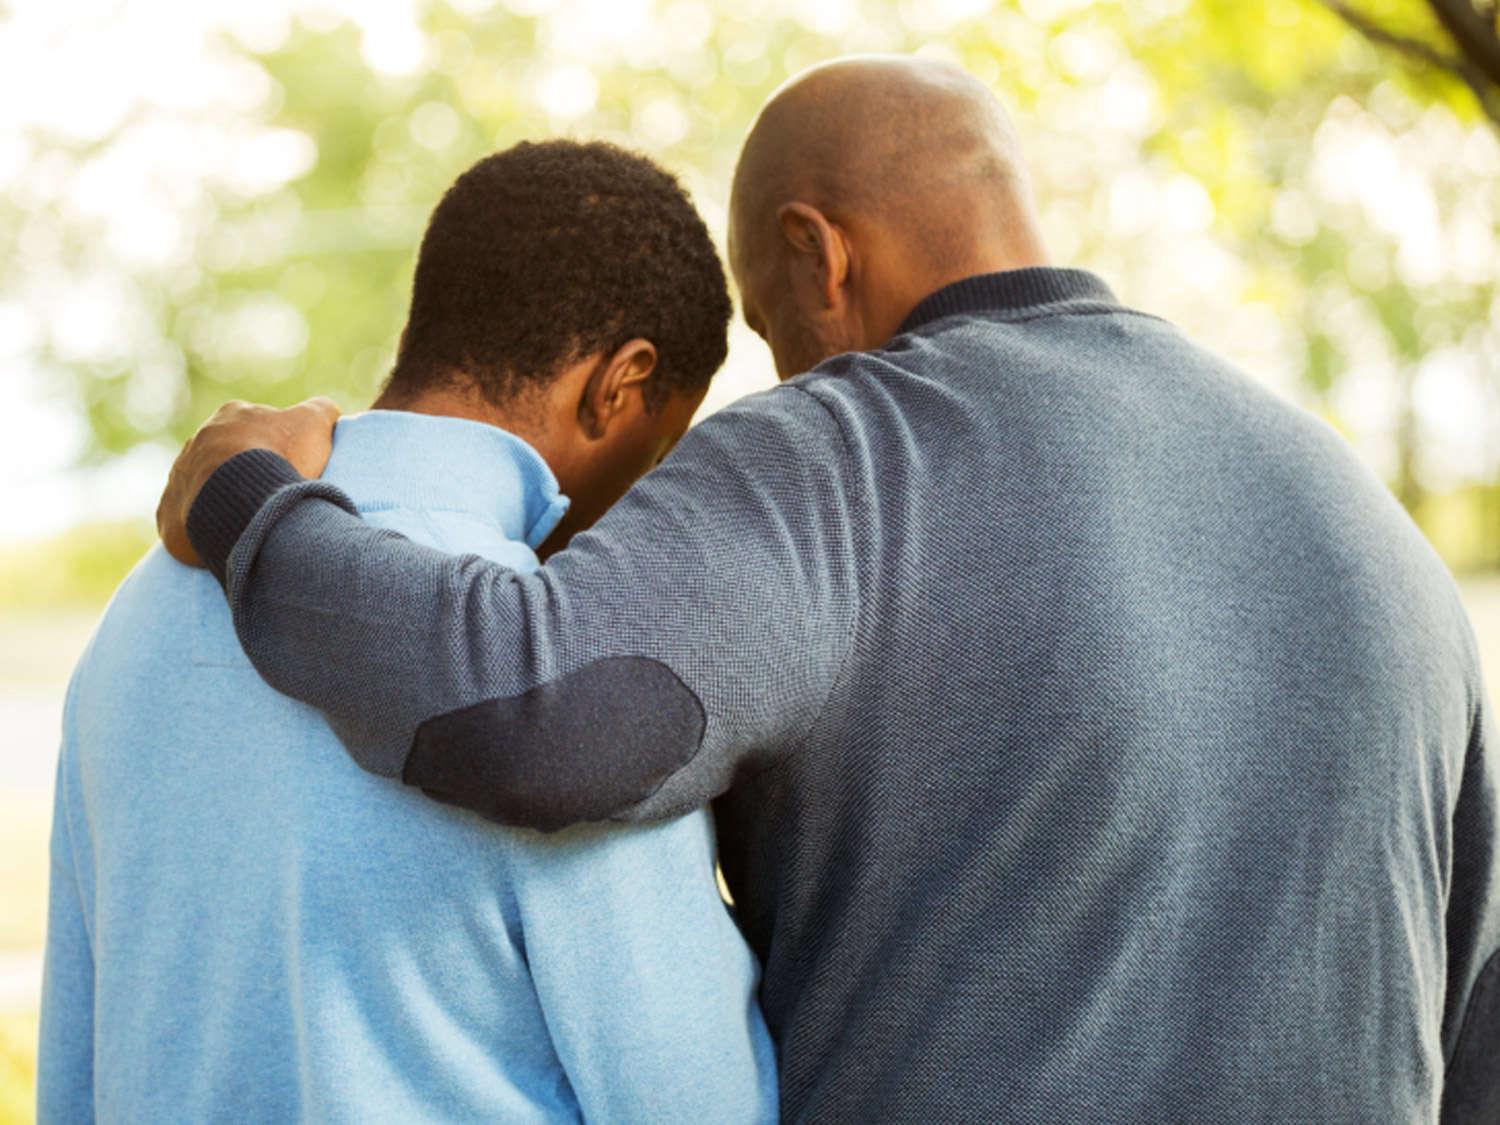 5 Quick Things To Do If You Have Failed As A Father